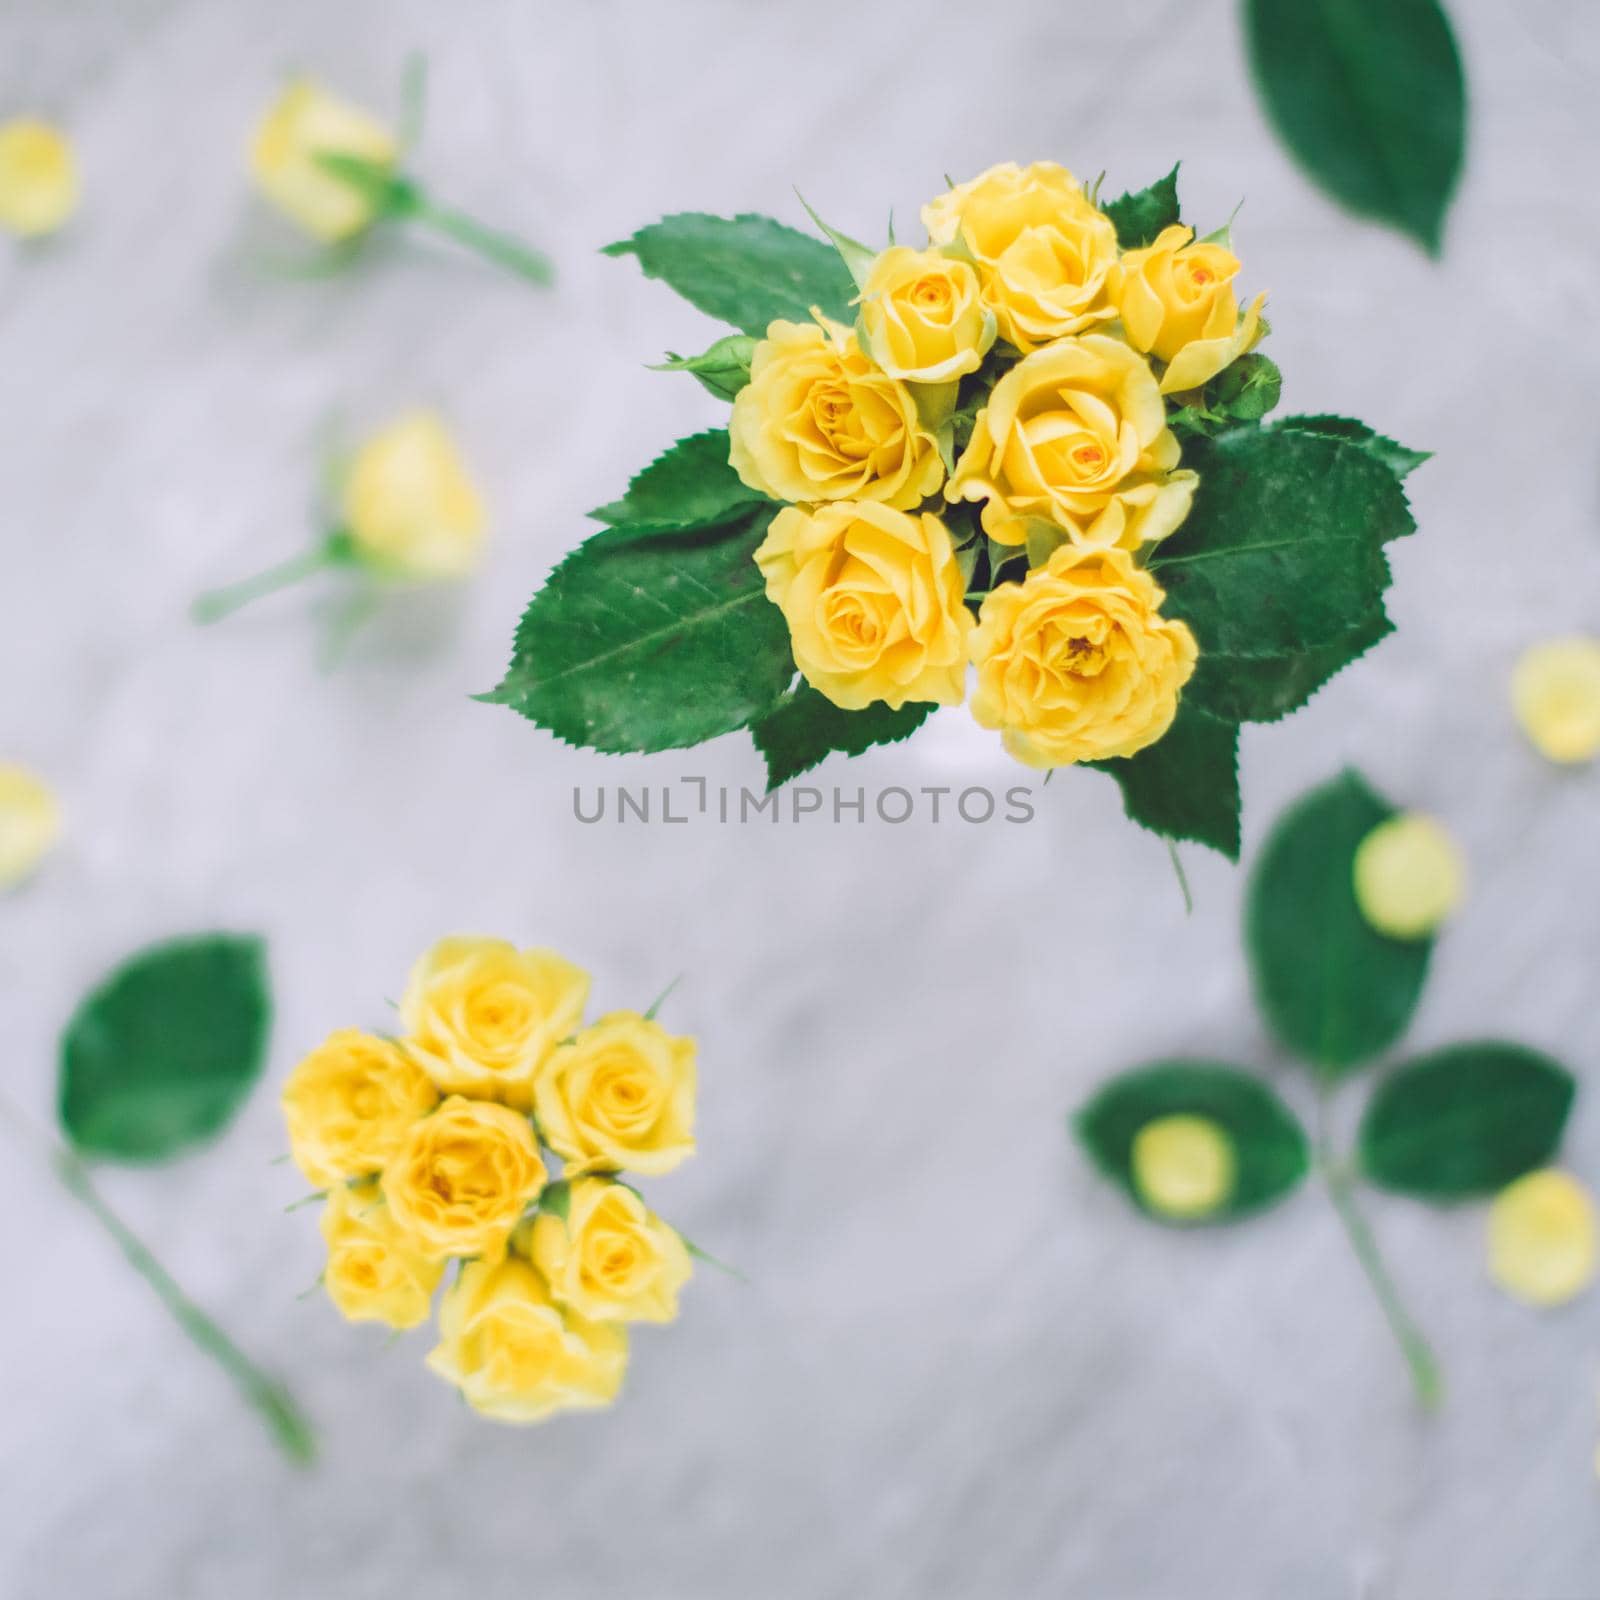 yellow roses - wedding, holiday and floral garden styled concept, elegant visuals